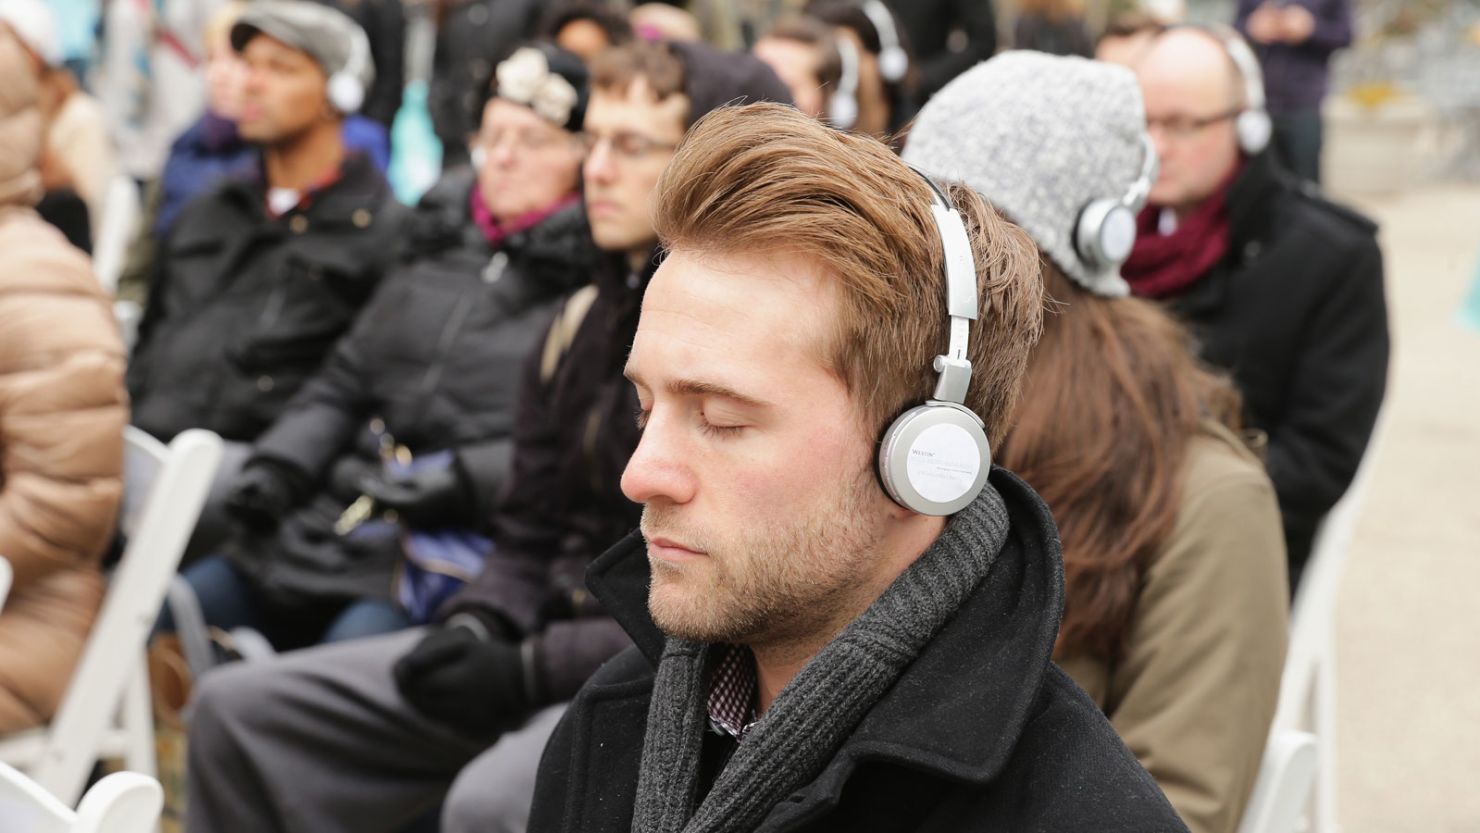 New Yorkers using the Headspace app during a "Meditation Moment" at Rockefeller Plaza in 2014. 